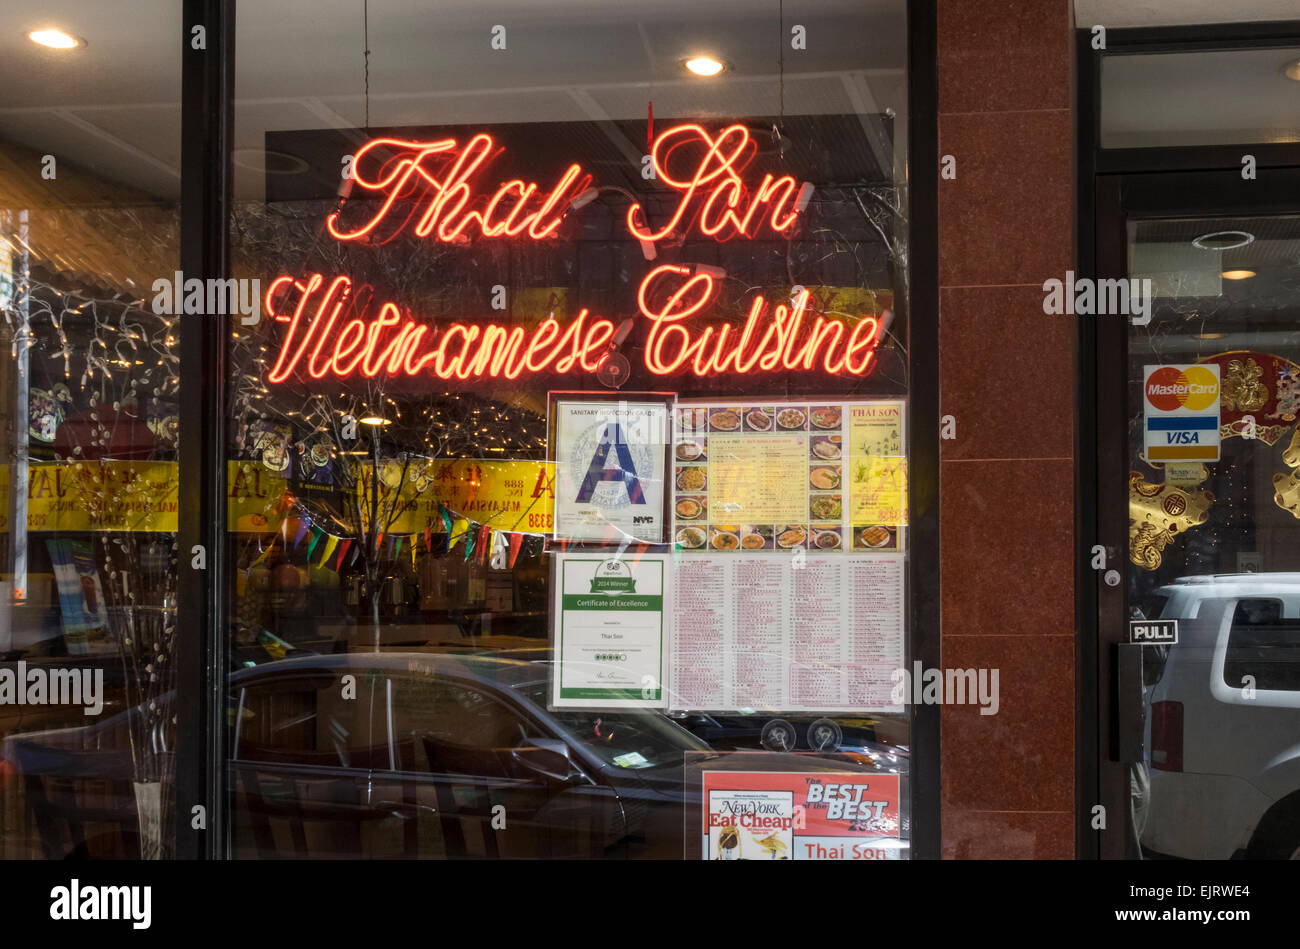 Neon sign in the window of a Vietnamese restaurant in Chinatown Stock Photo